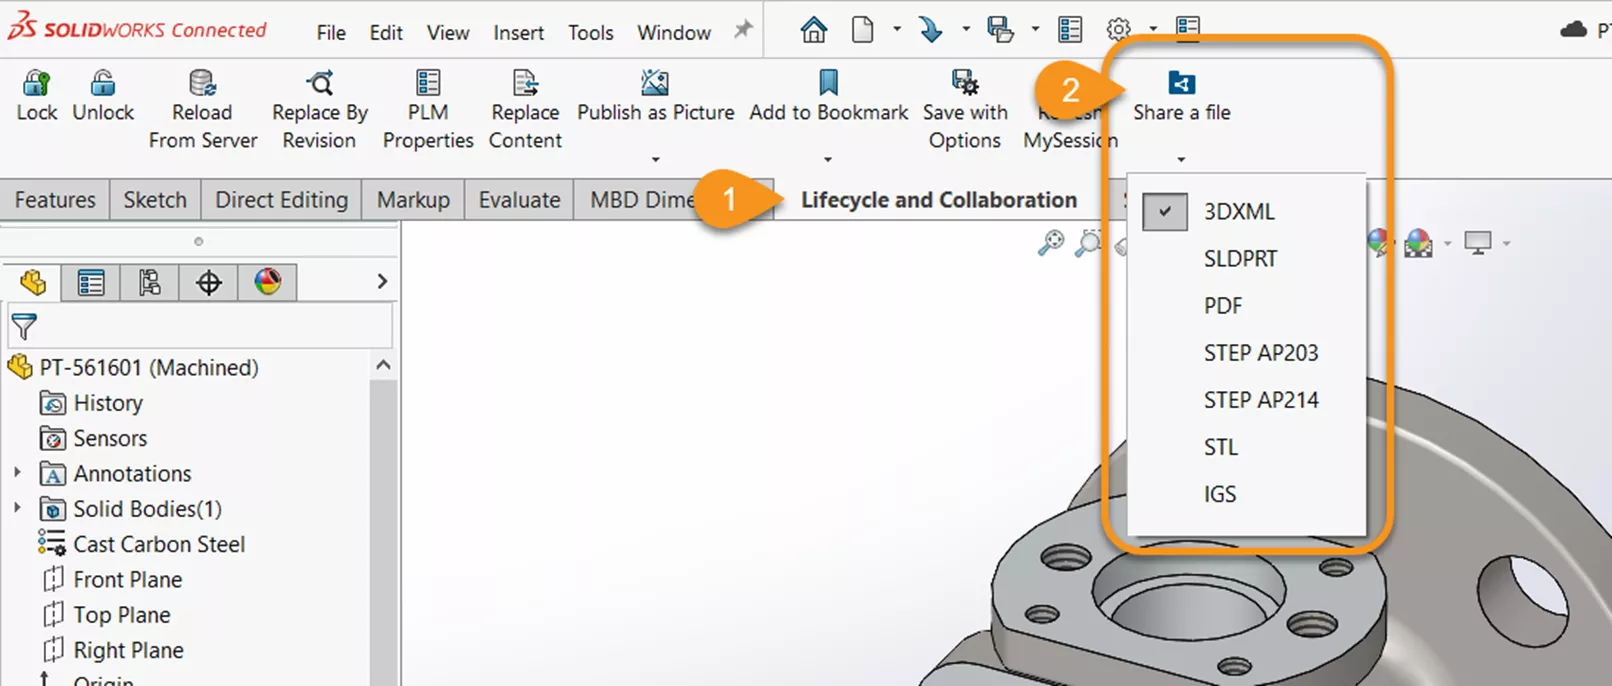 SOLIDWORKS Connected Share a File Command